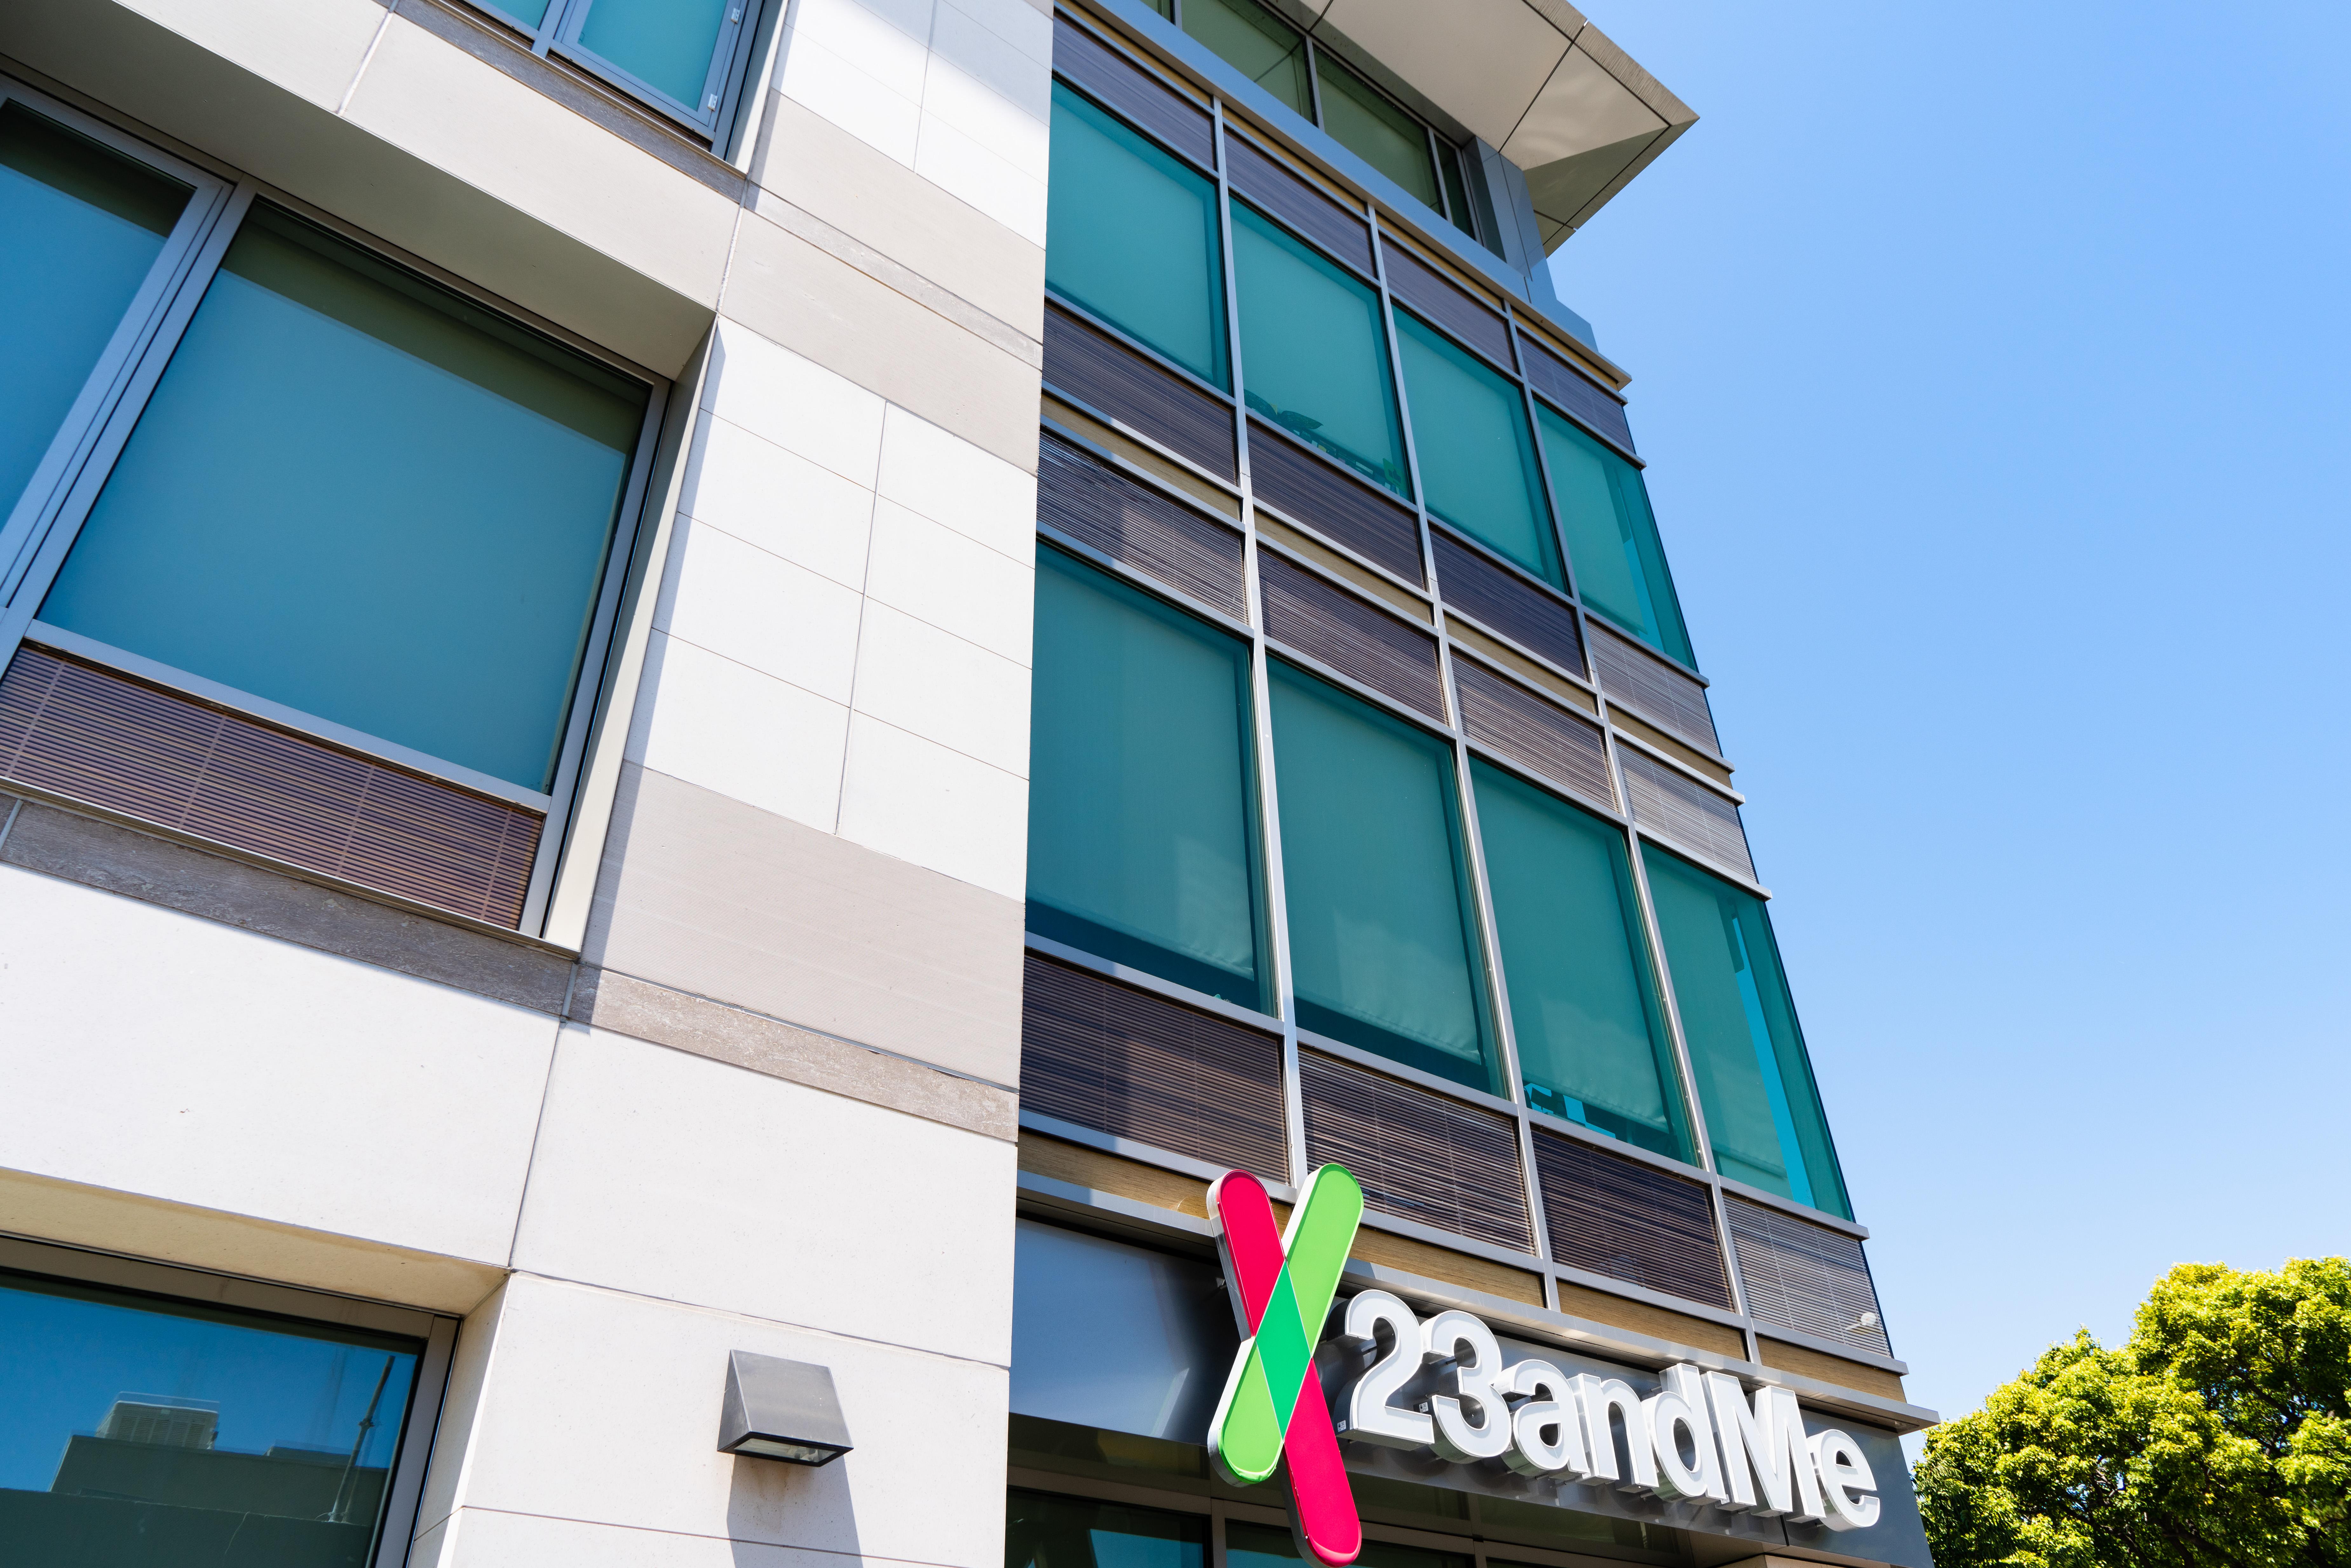 Office building with 23andMe logo